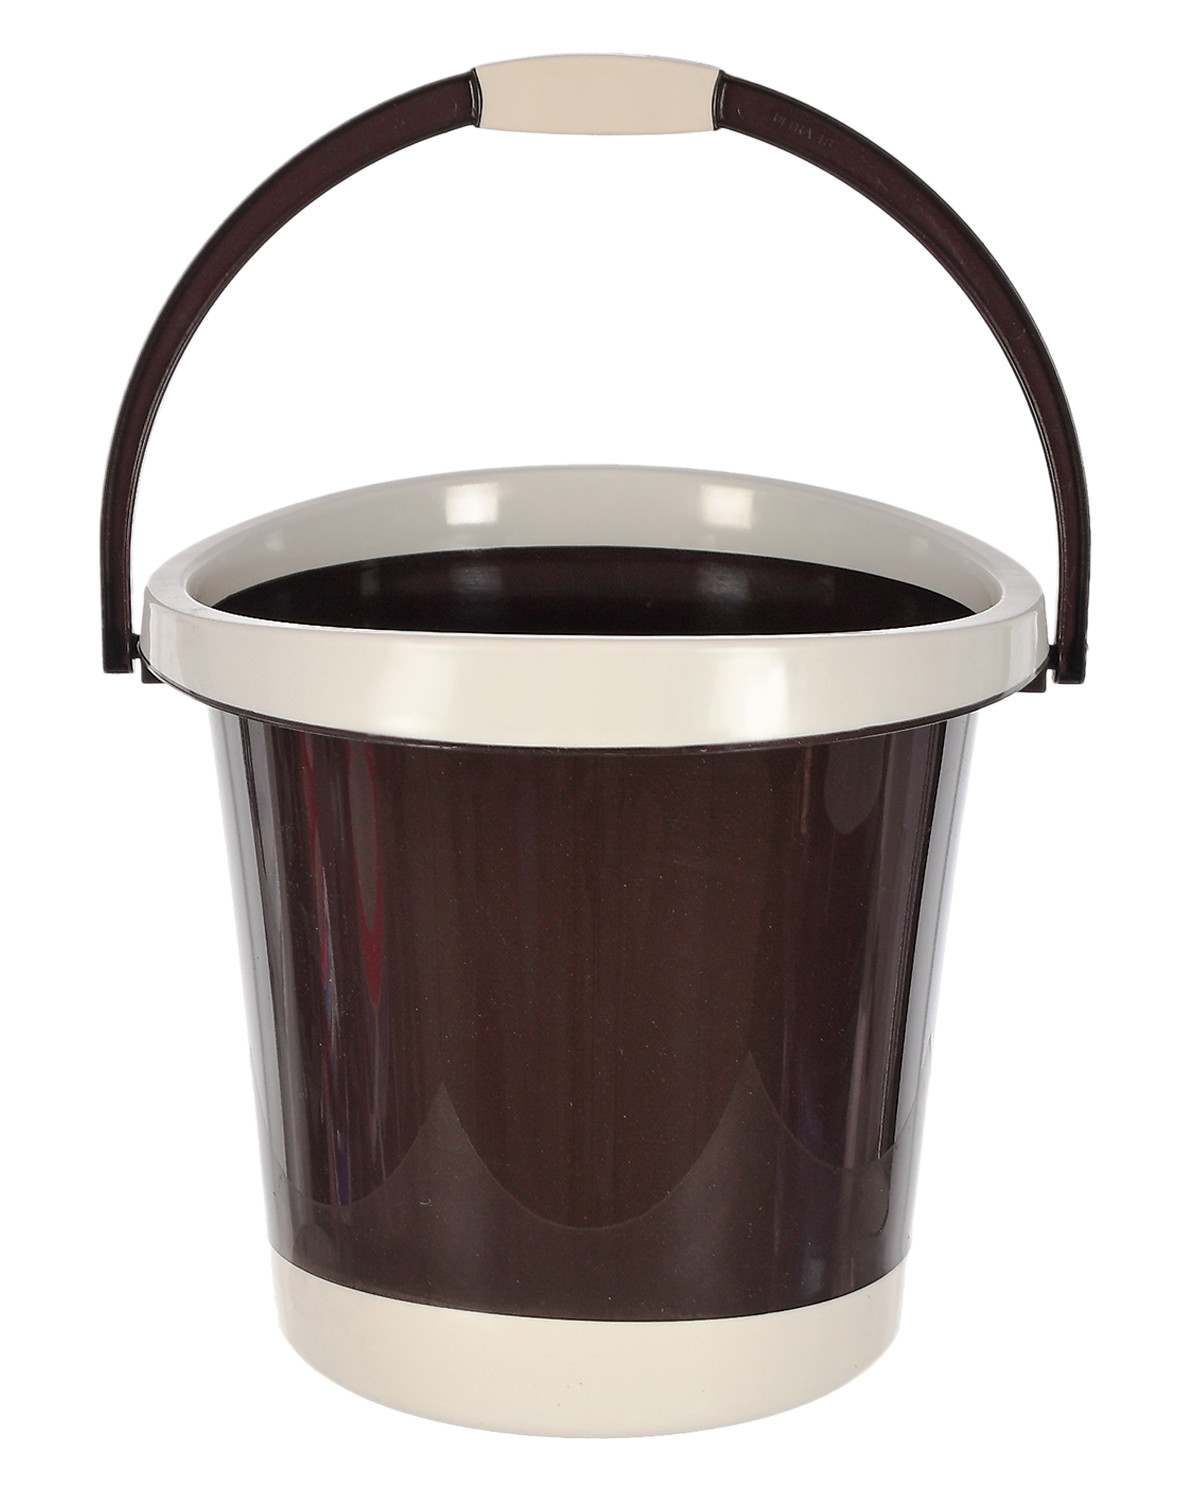 Kuber Industries Multiuses Plastic Bucket With Handle, 18 litre- Pack of 2 (Grey & Brown)-46KM0367